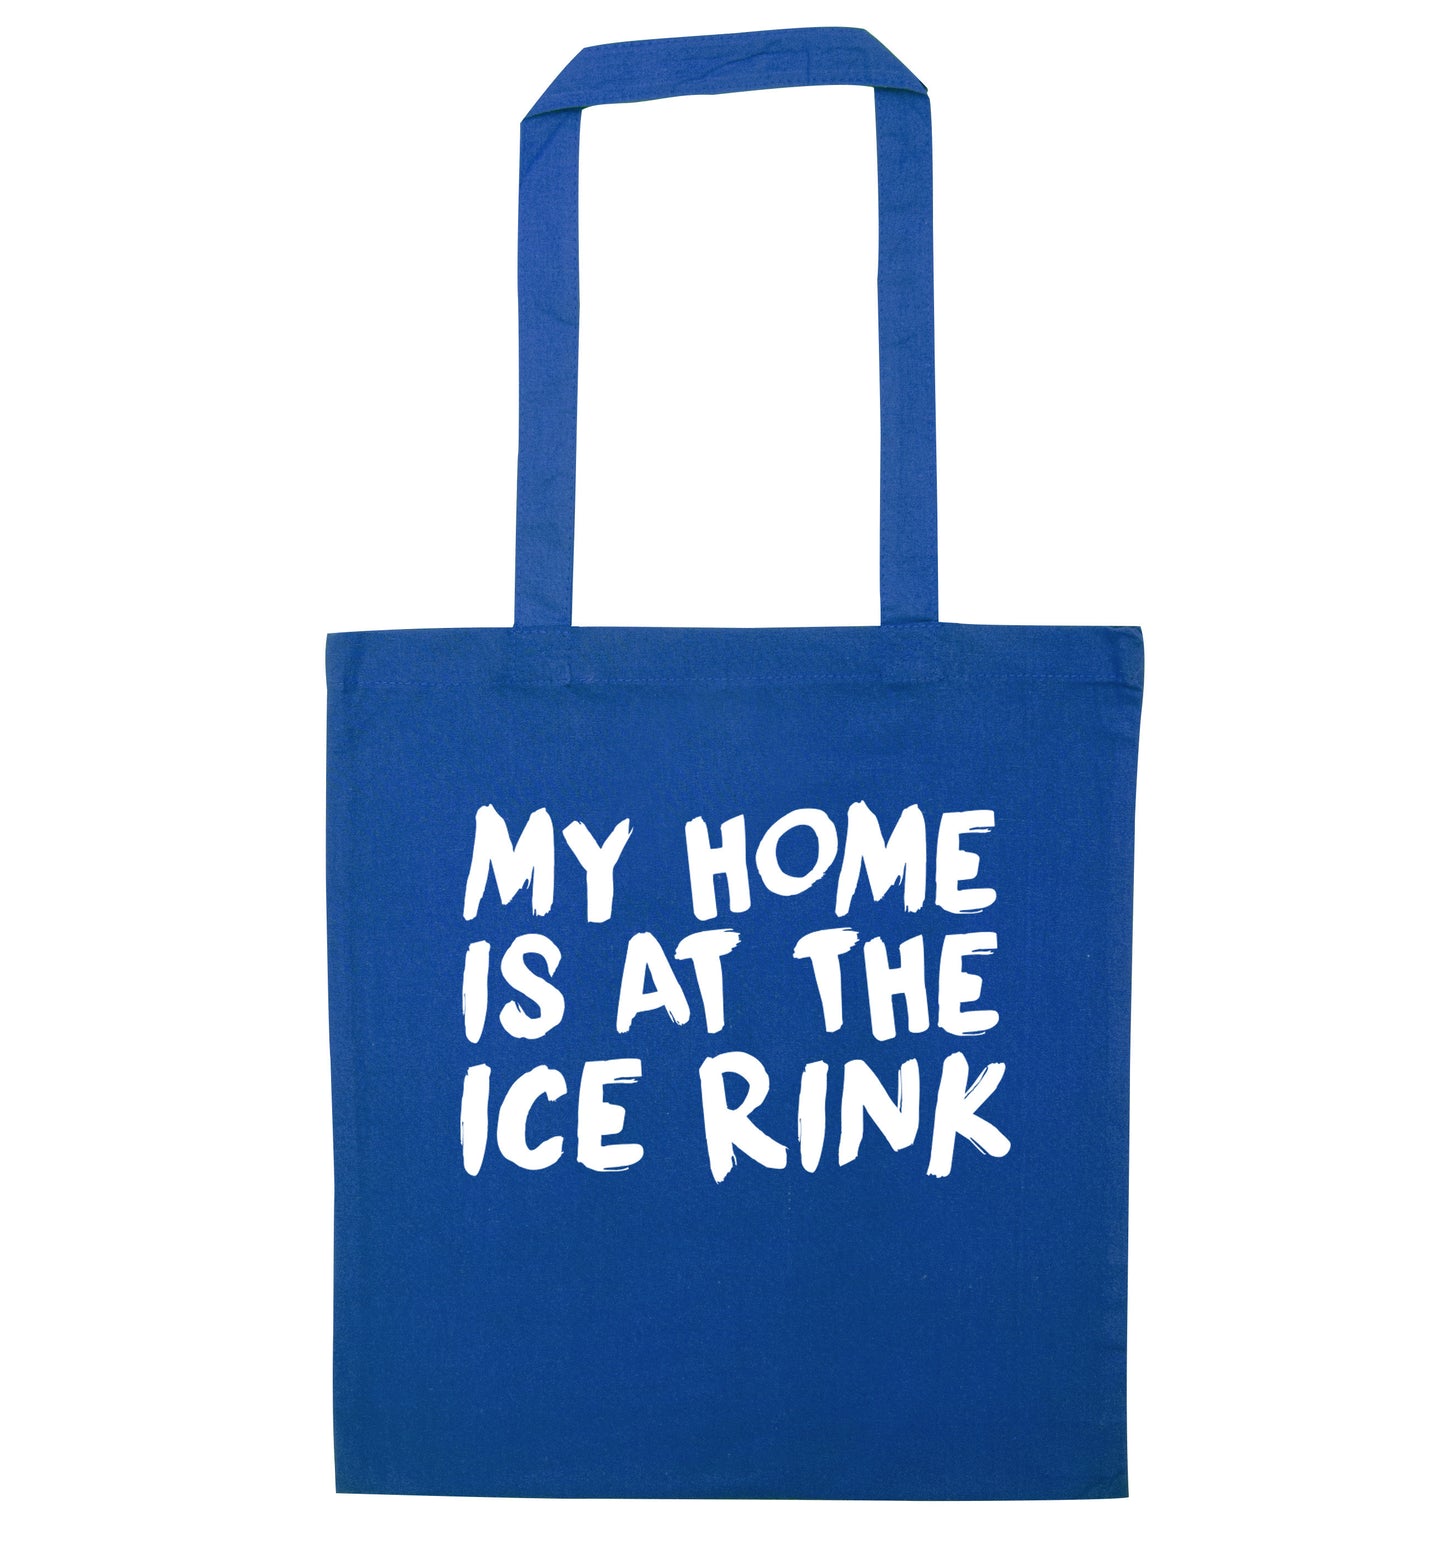 My home is at the ice rink blue tote bag